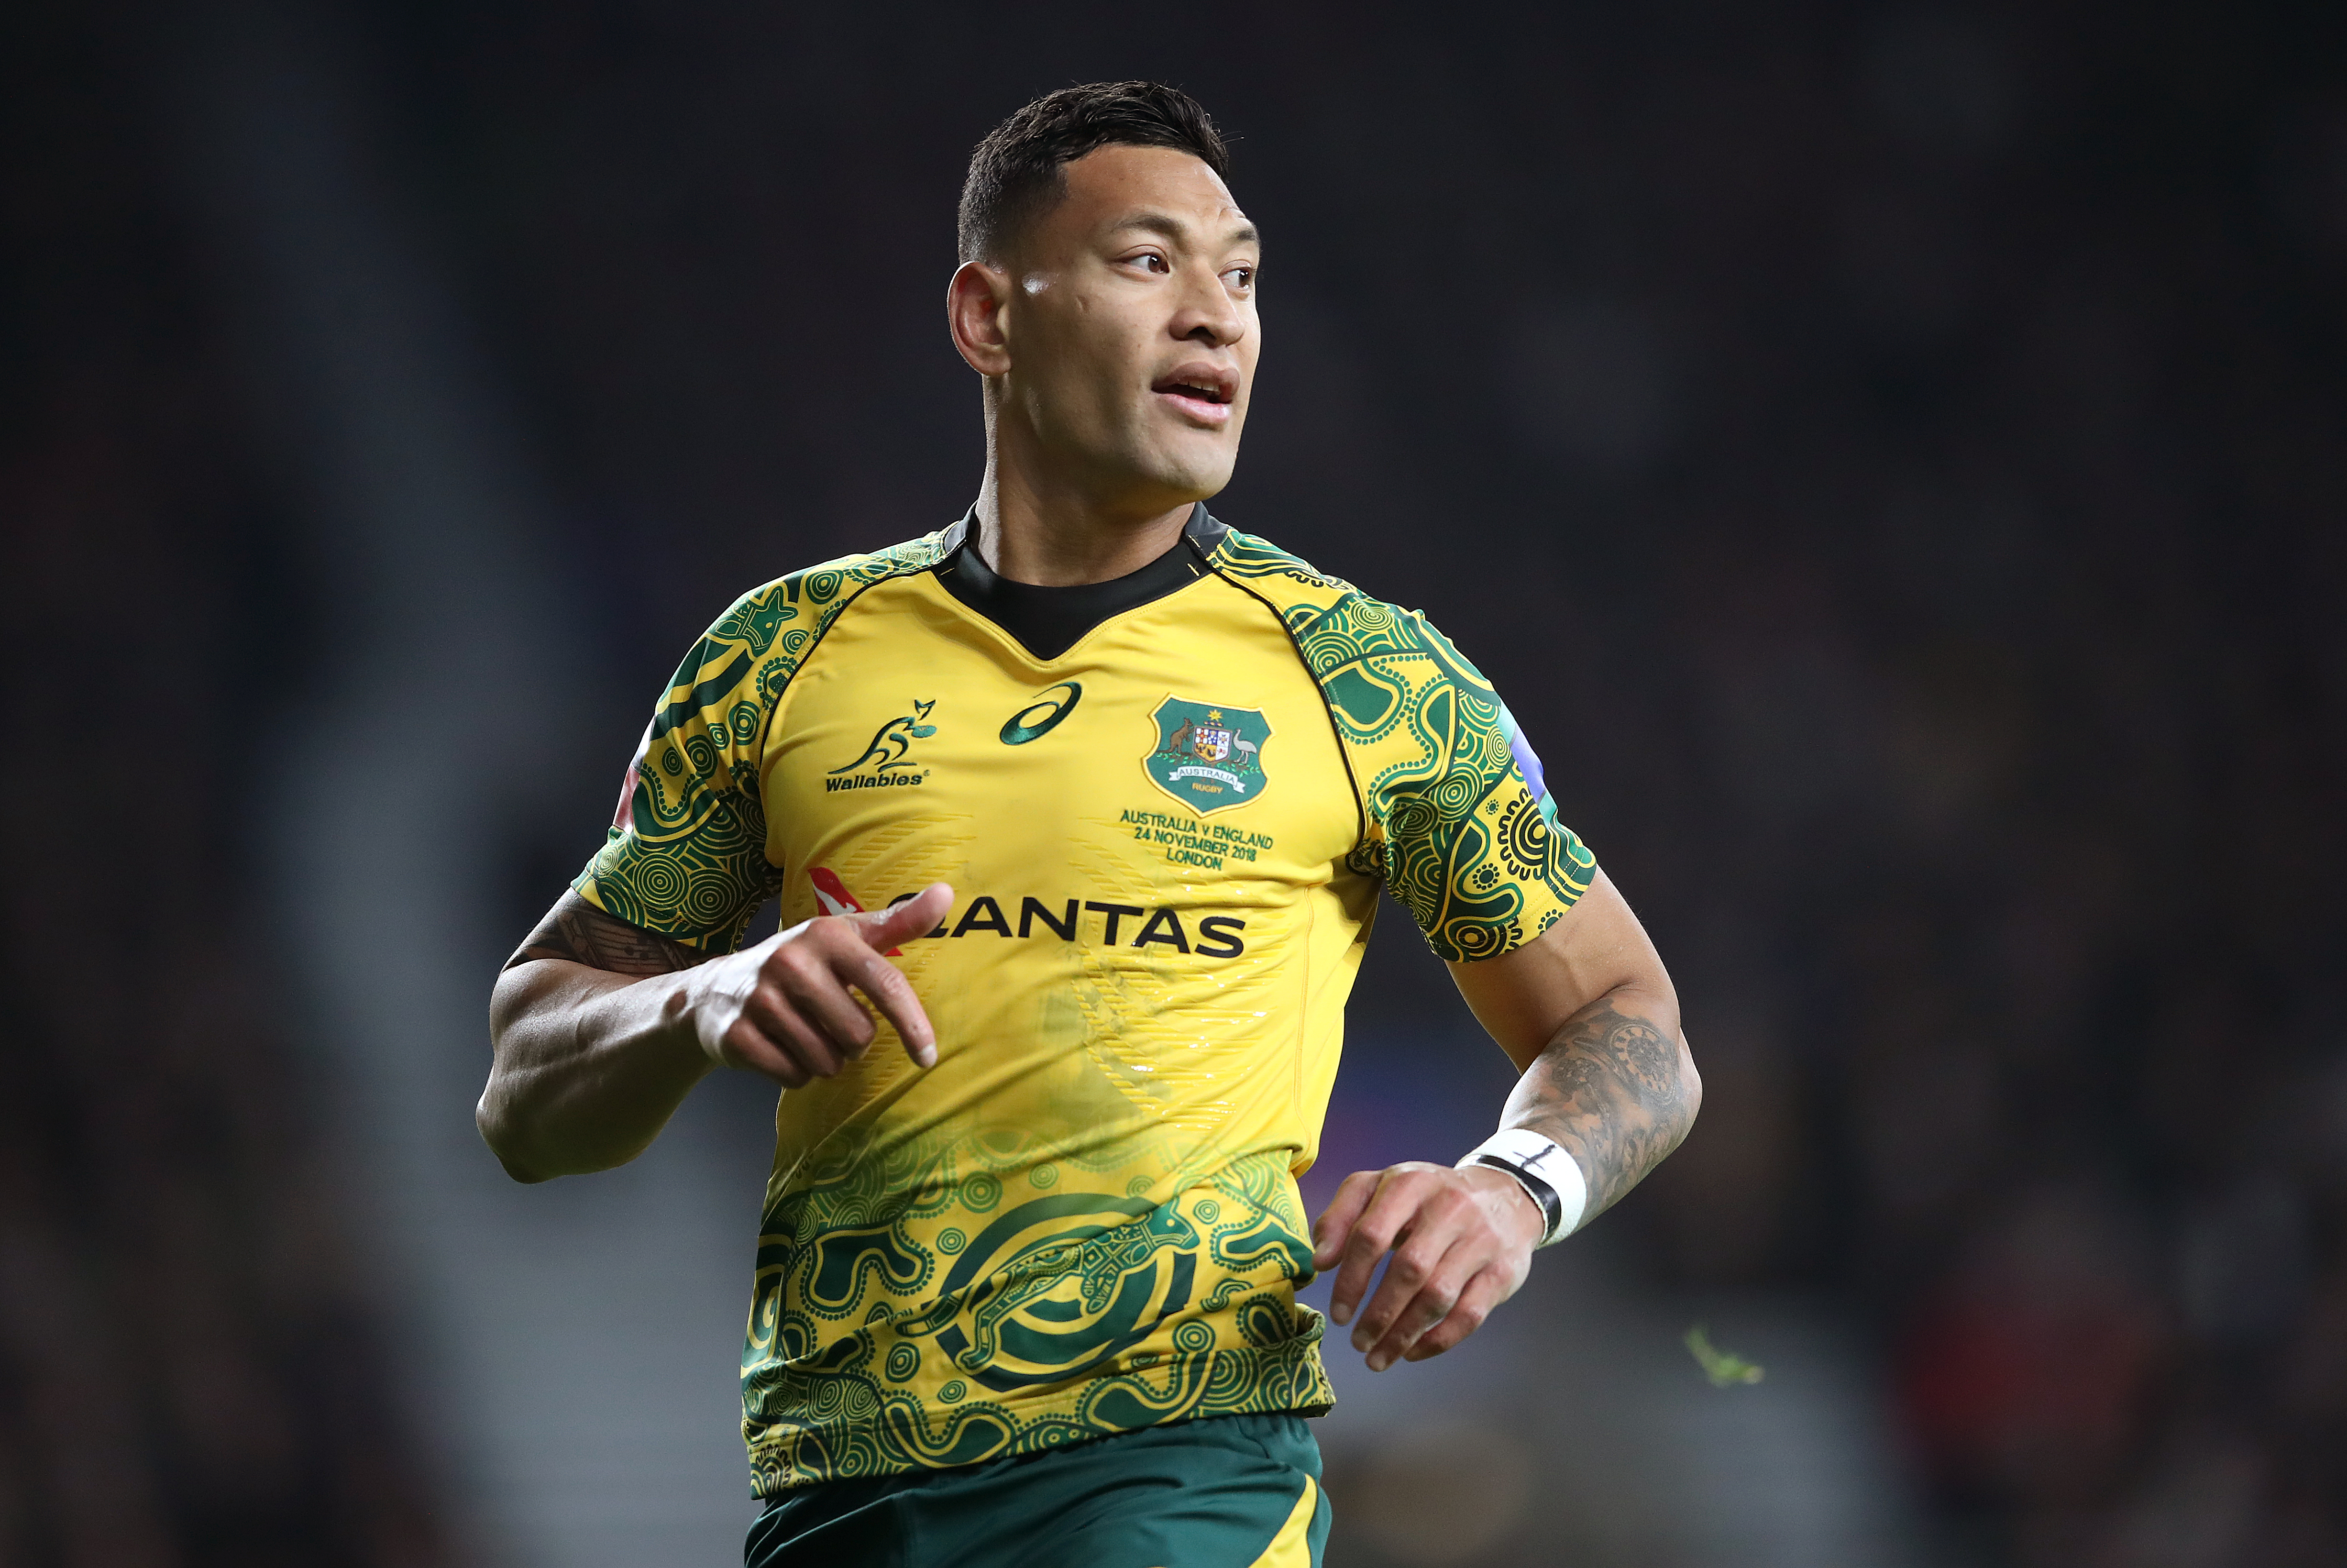 Israel Folau weighs his options after sacking from Wallabies